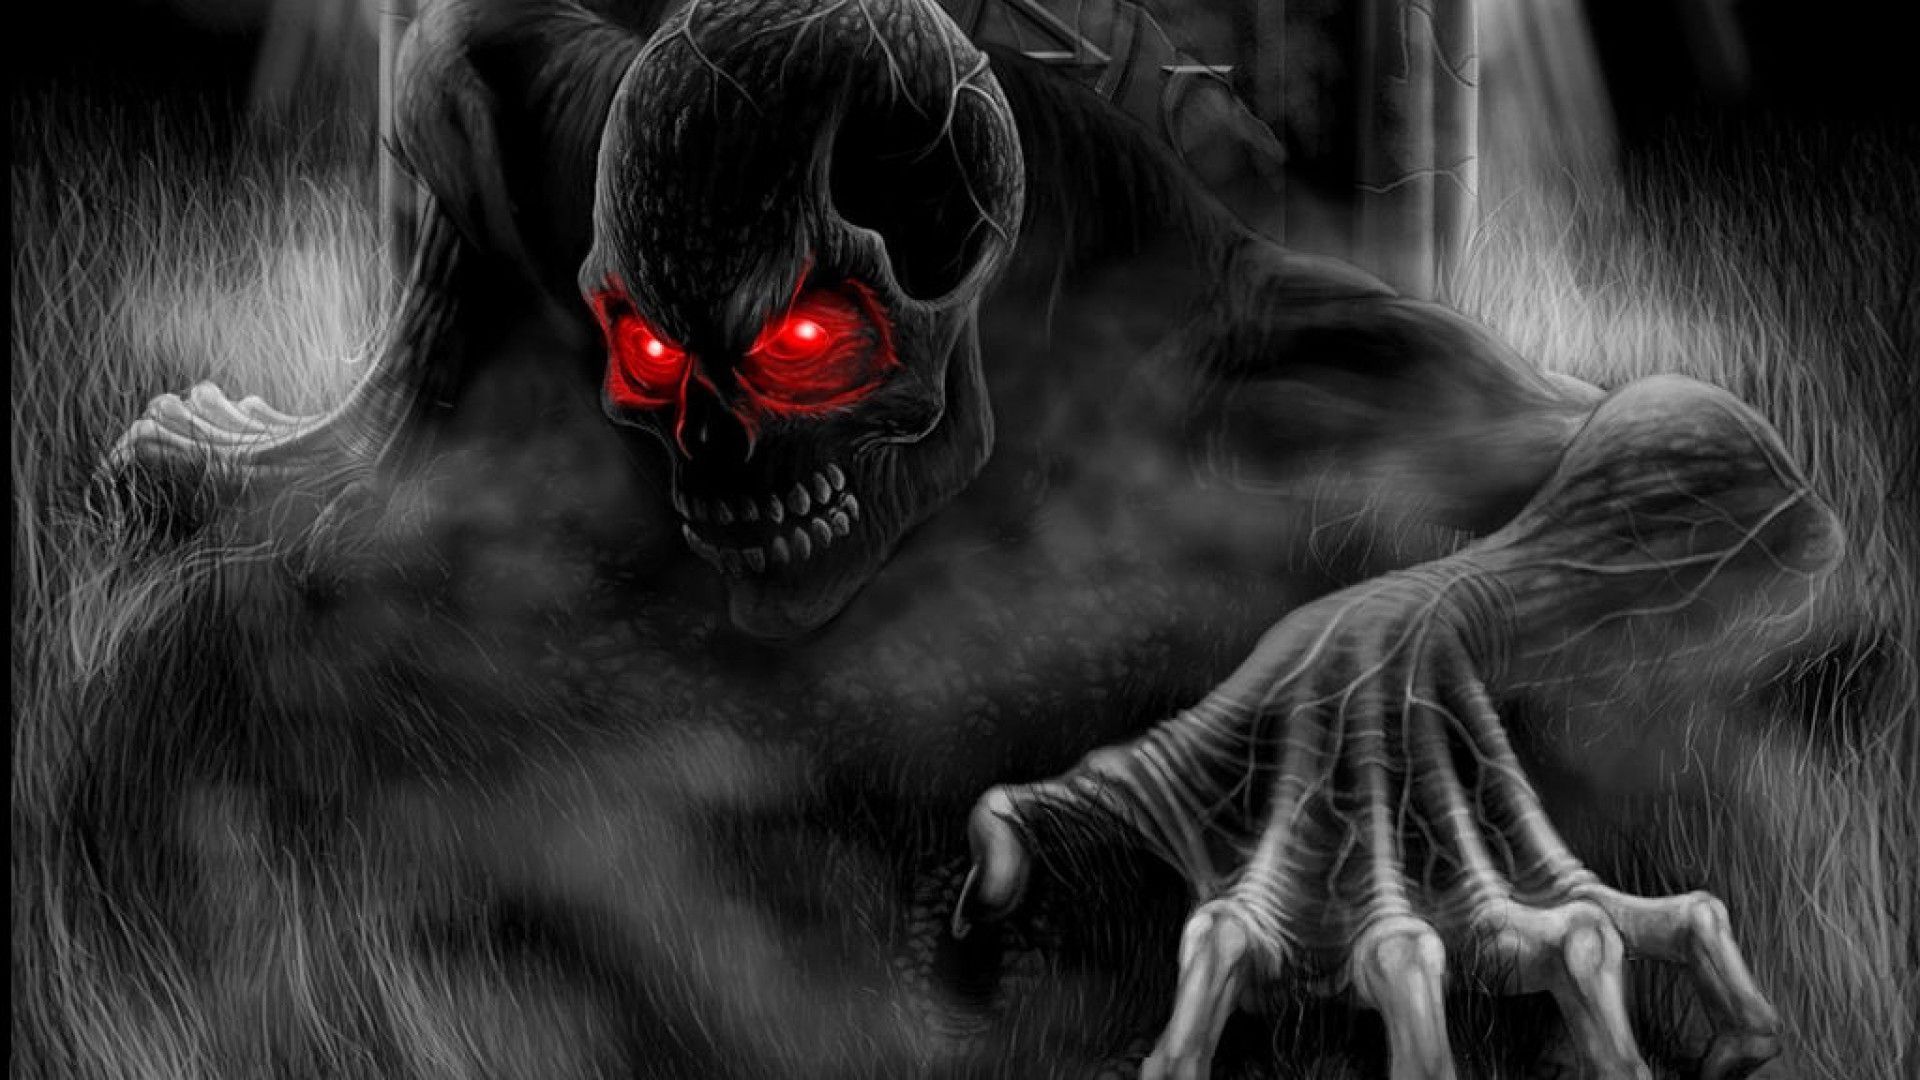 A scary looking demon with red eyes - Horror